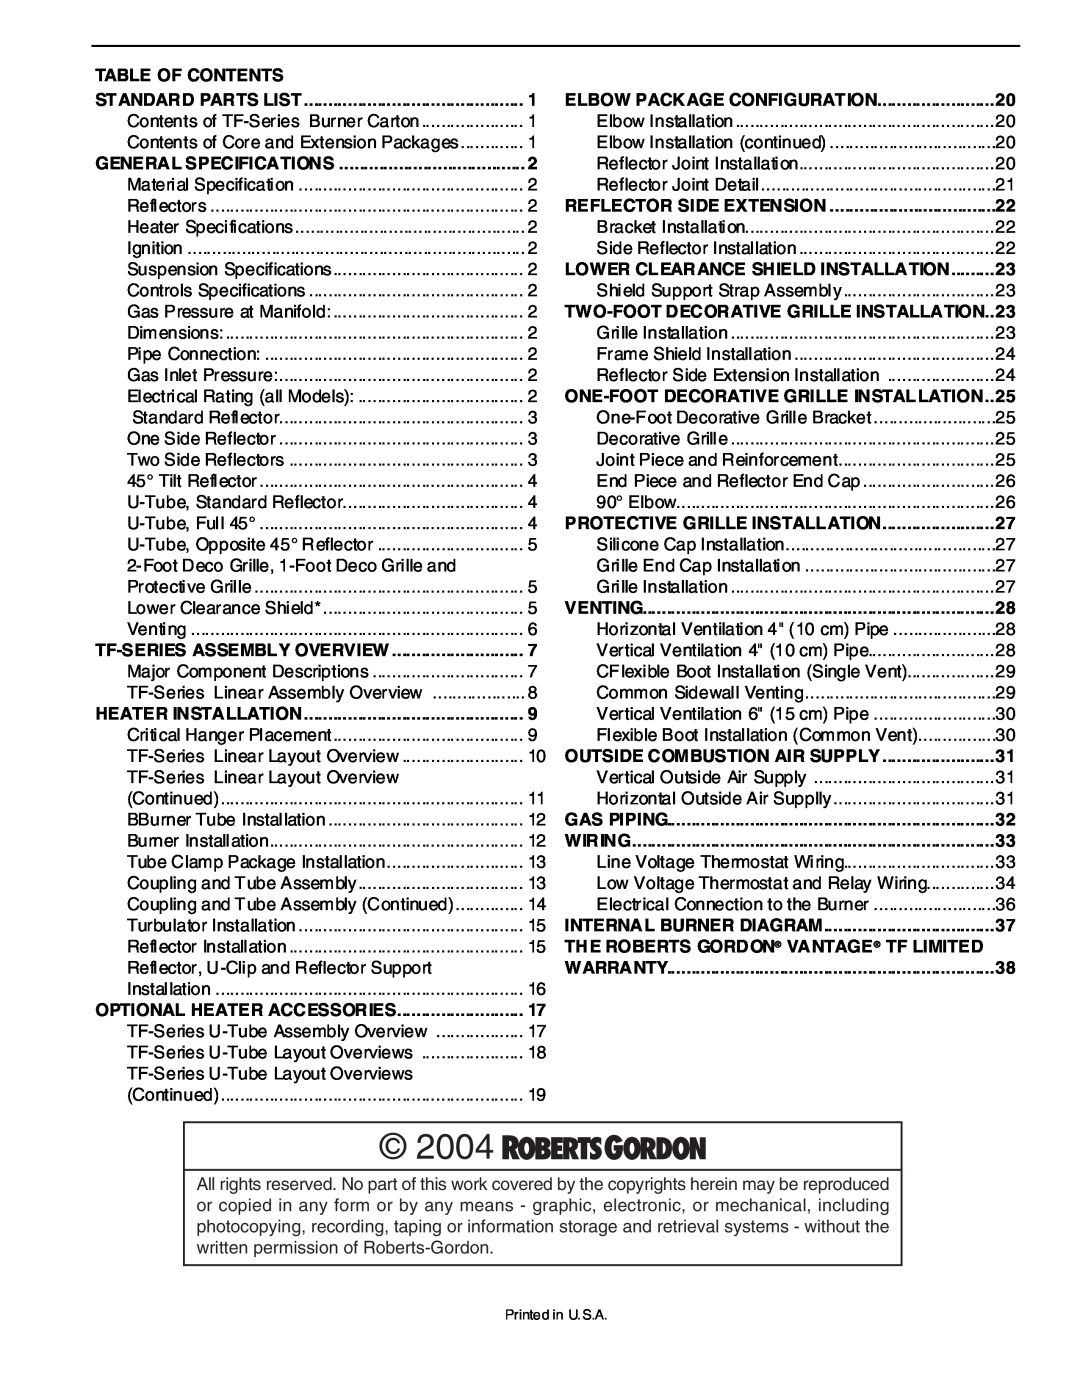 Roberts Gorden TF-Series service manual 2004, Table Of Contents, Optional Heater Accessories, Elbow Package Configuration 